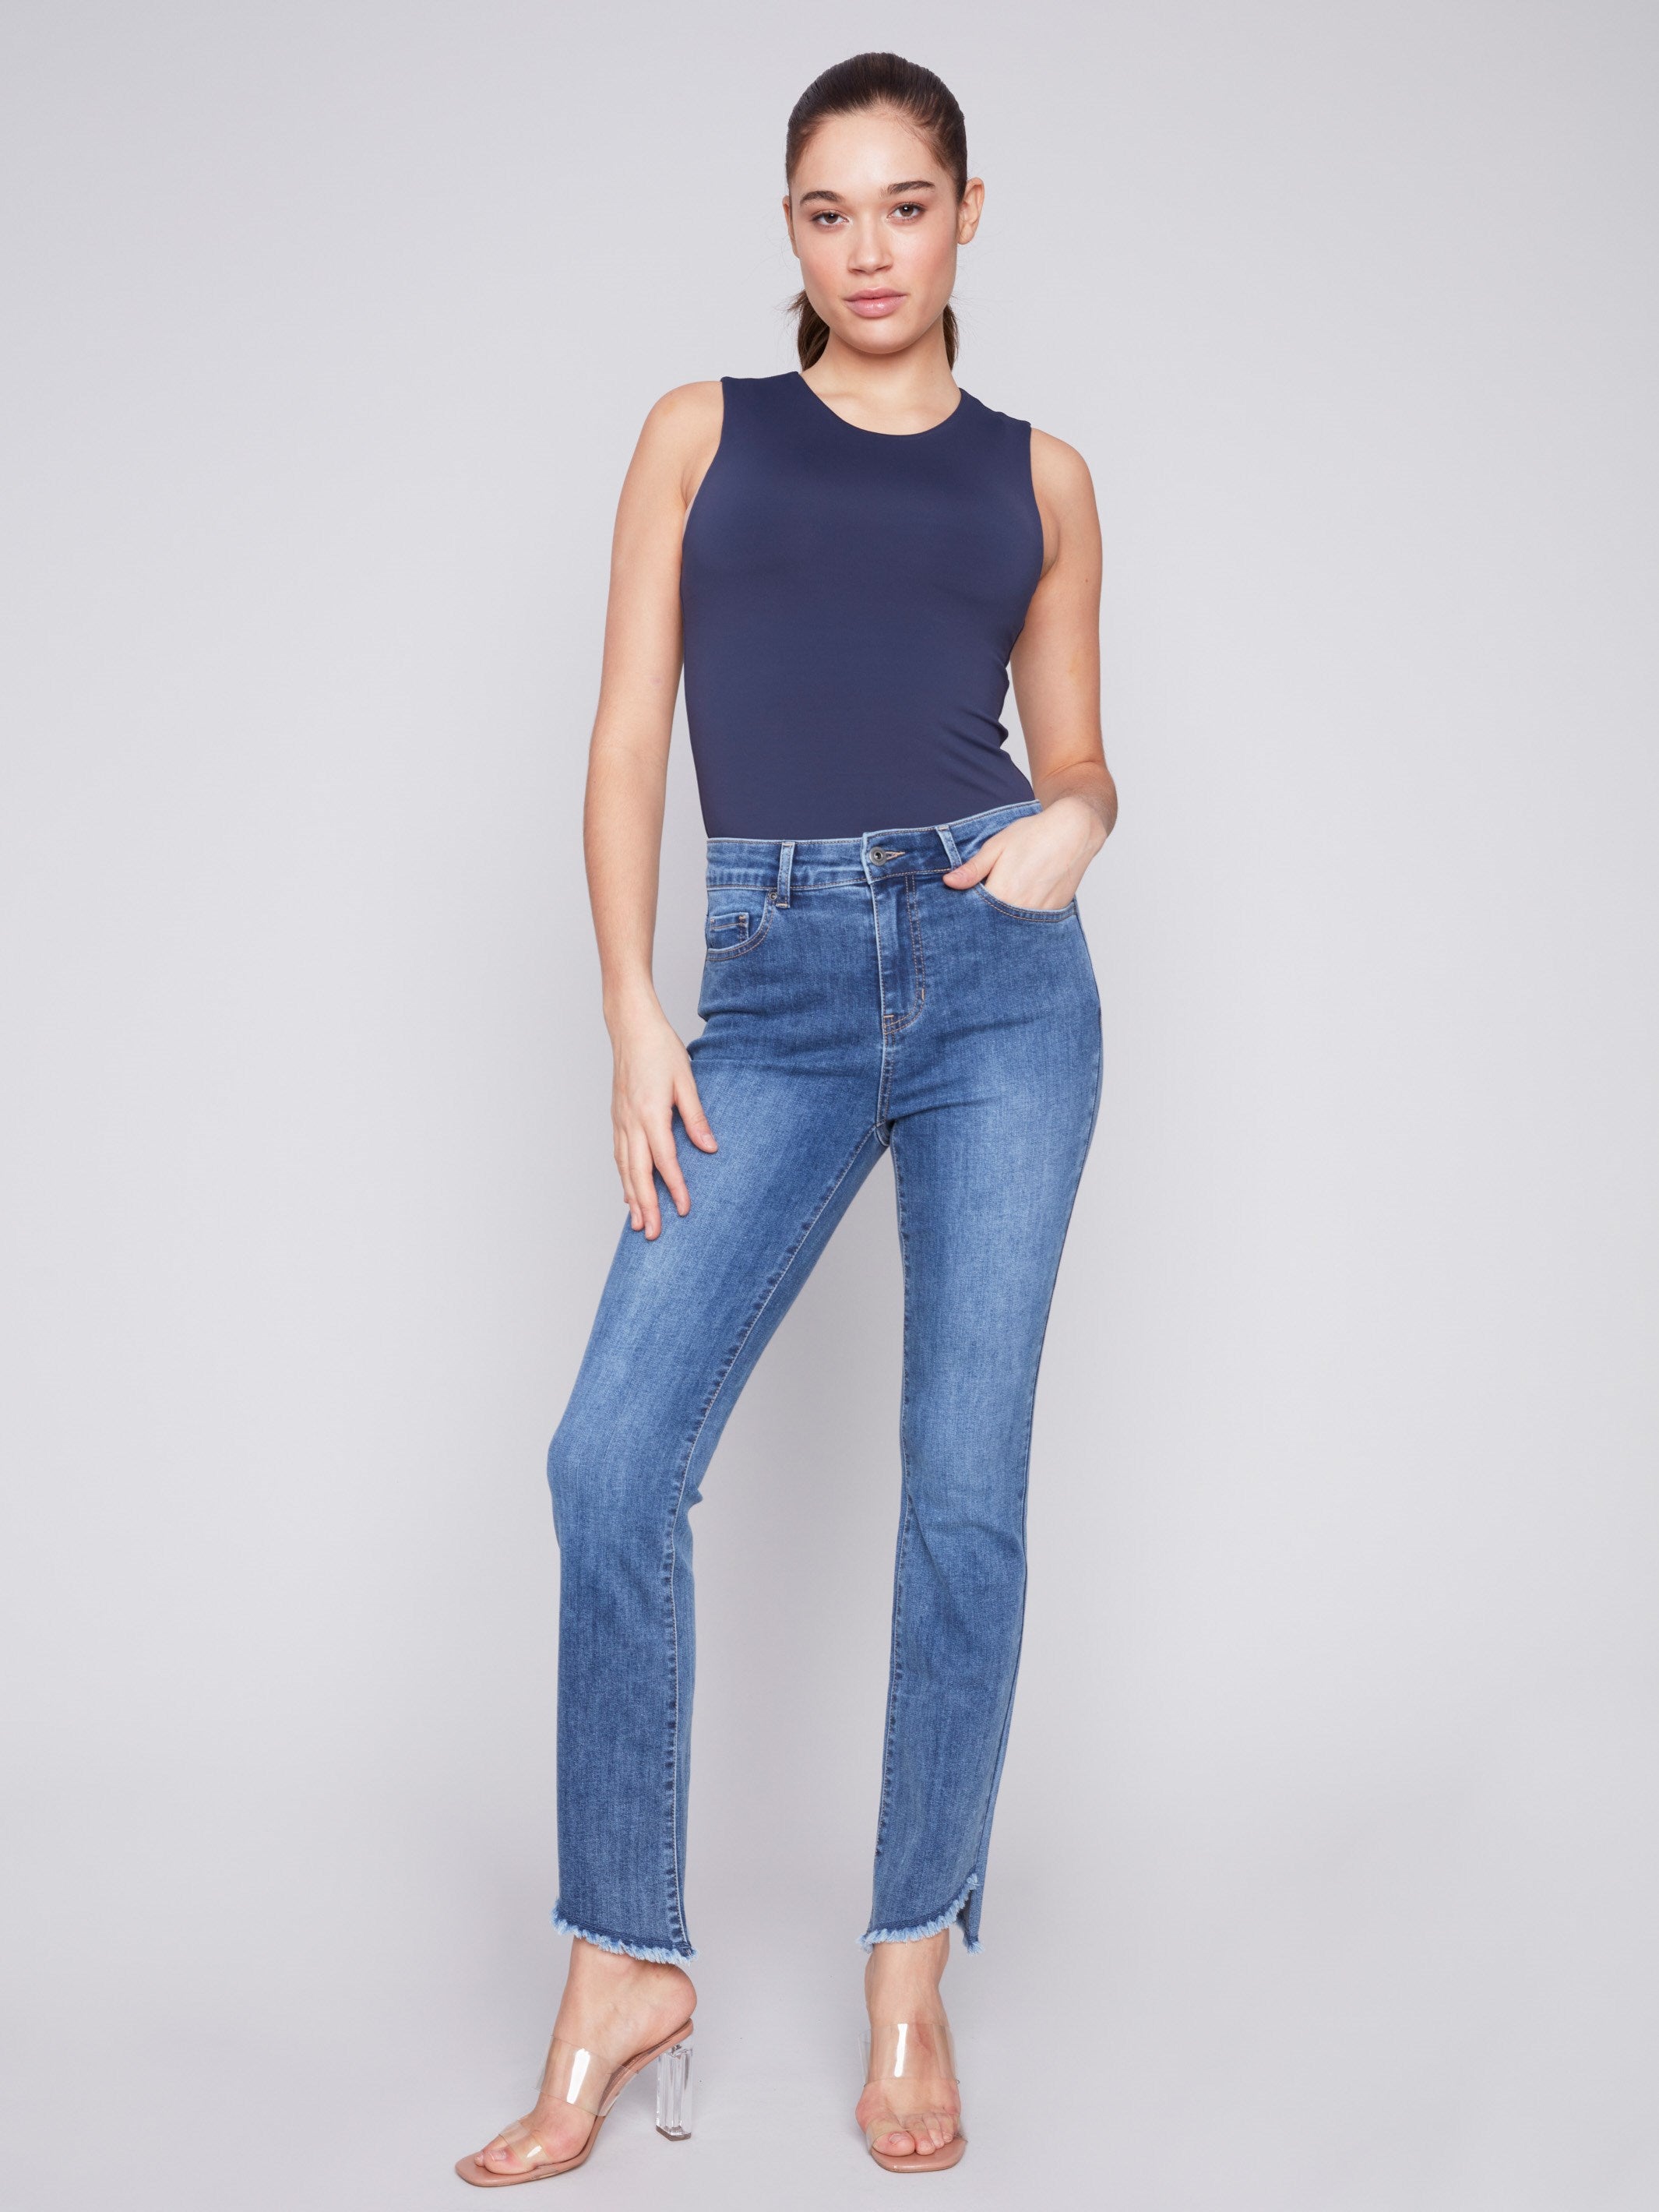 Bootcut Jeans with Asymmetrical Hem - Medium Blue - Charlie B Collection Canada - Image 8